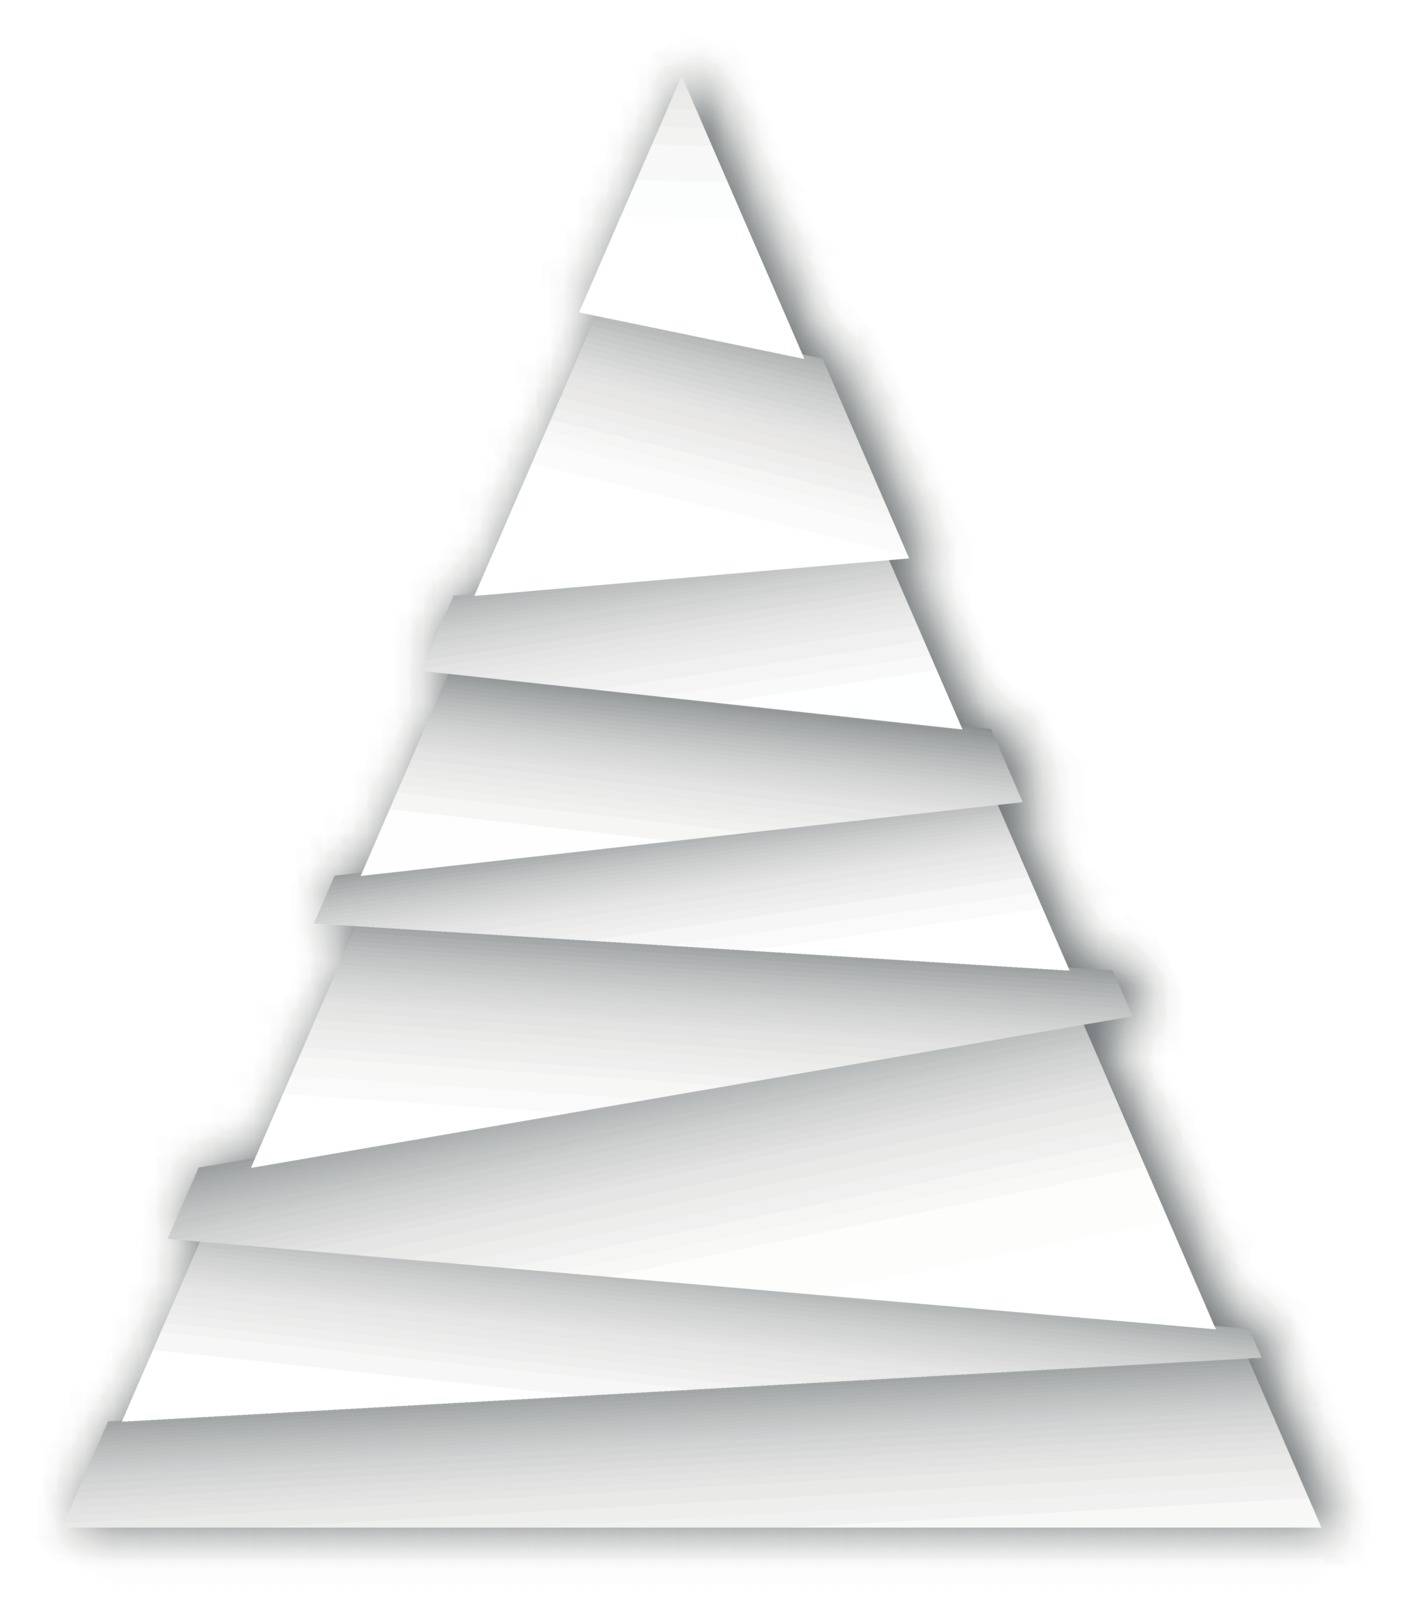 Christmas tree of white layered triangles on white background. 3D vector illustration with dropped shadow by pyty